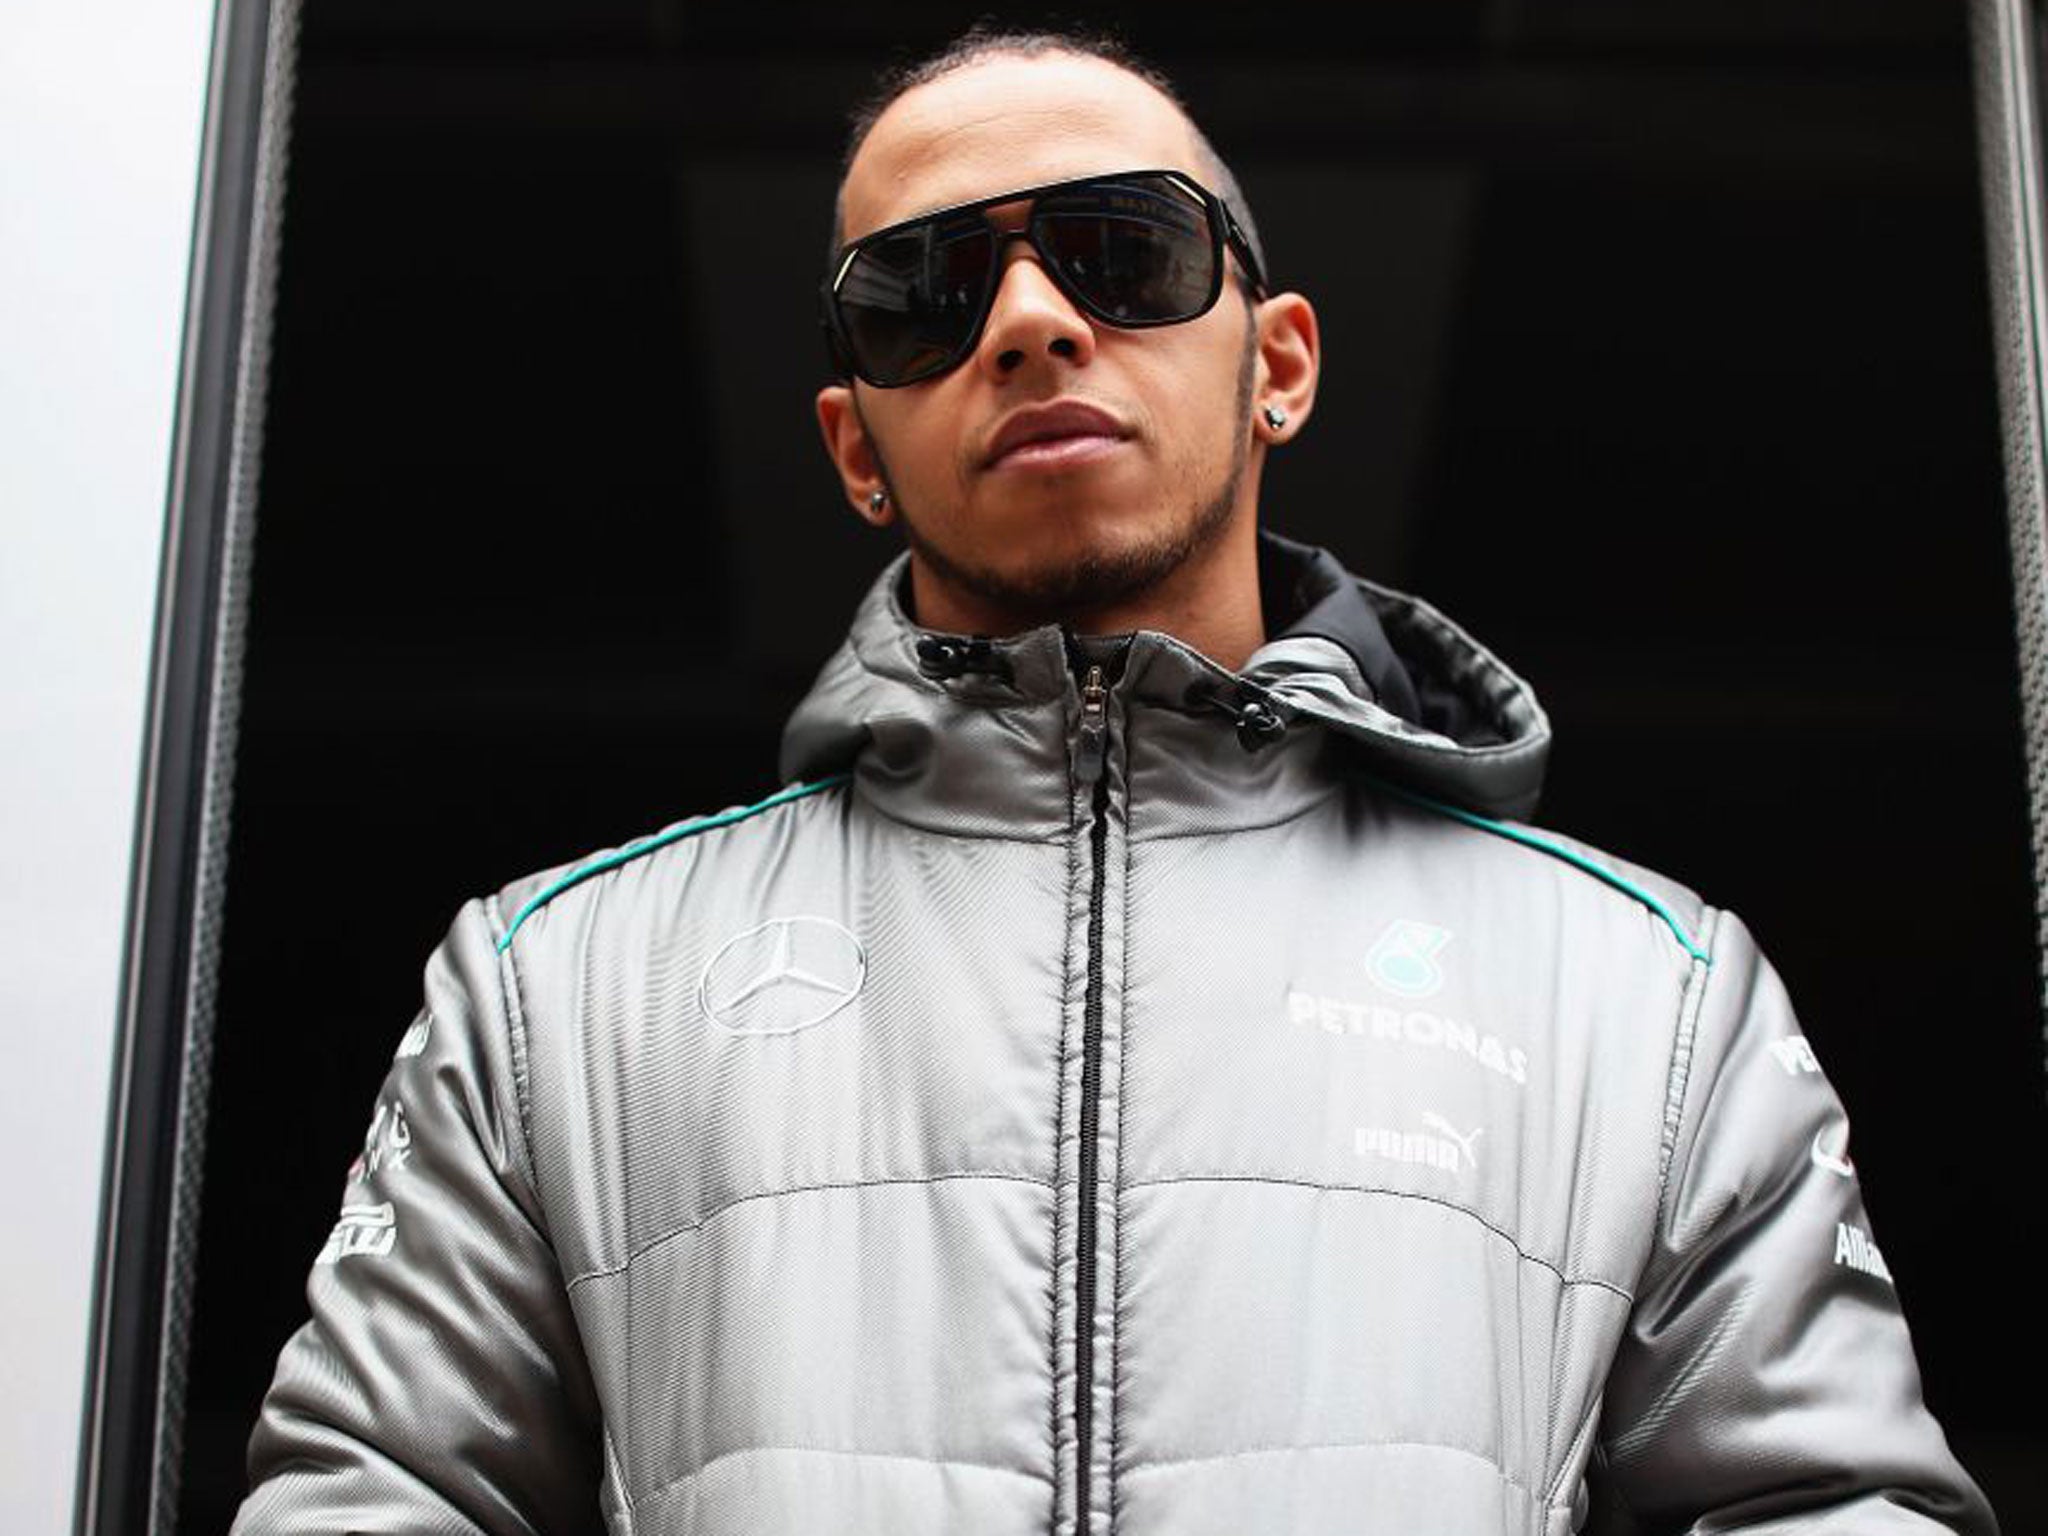 Lewis Hamilton could never be his own man at at McLaren